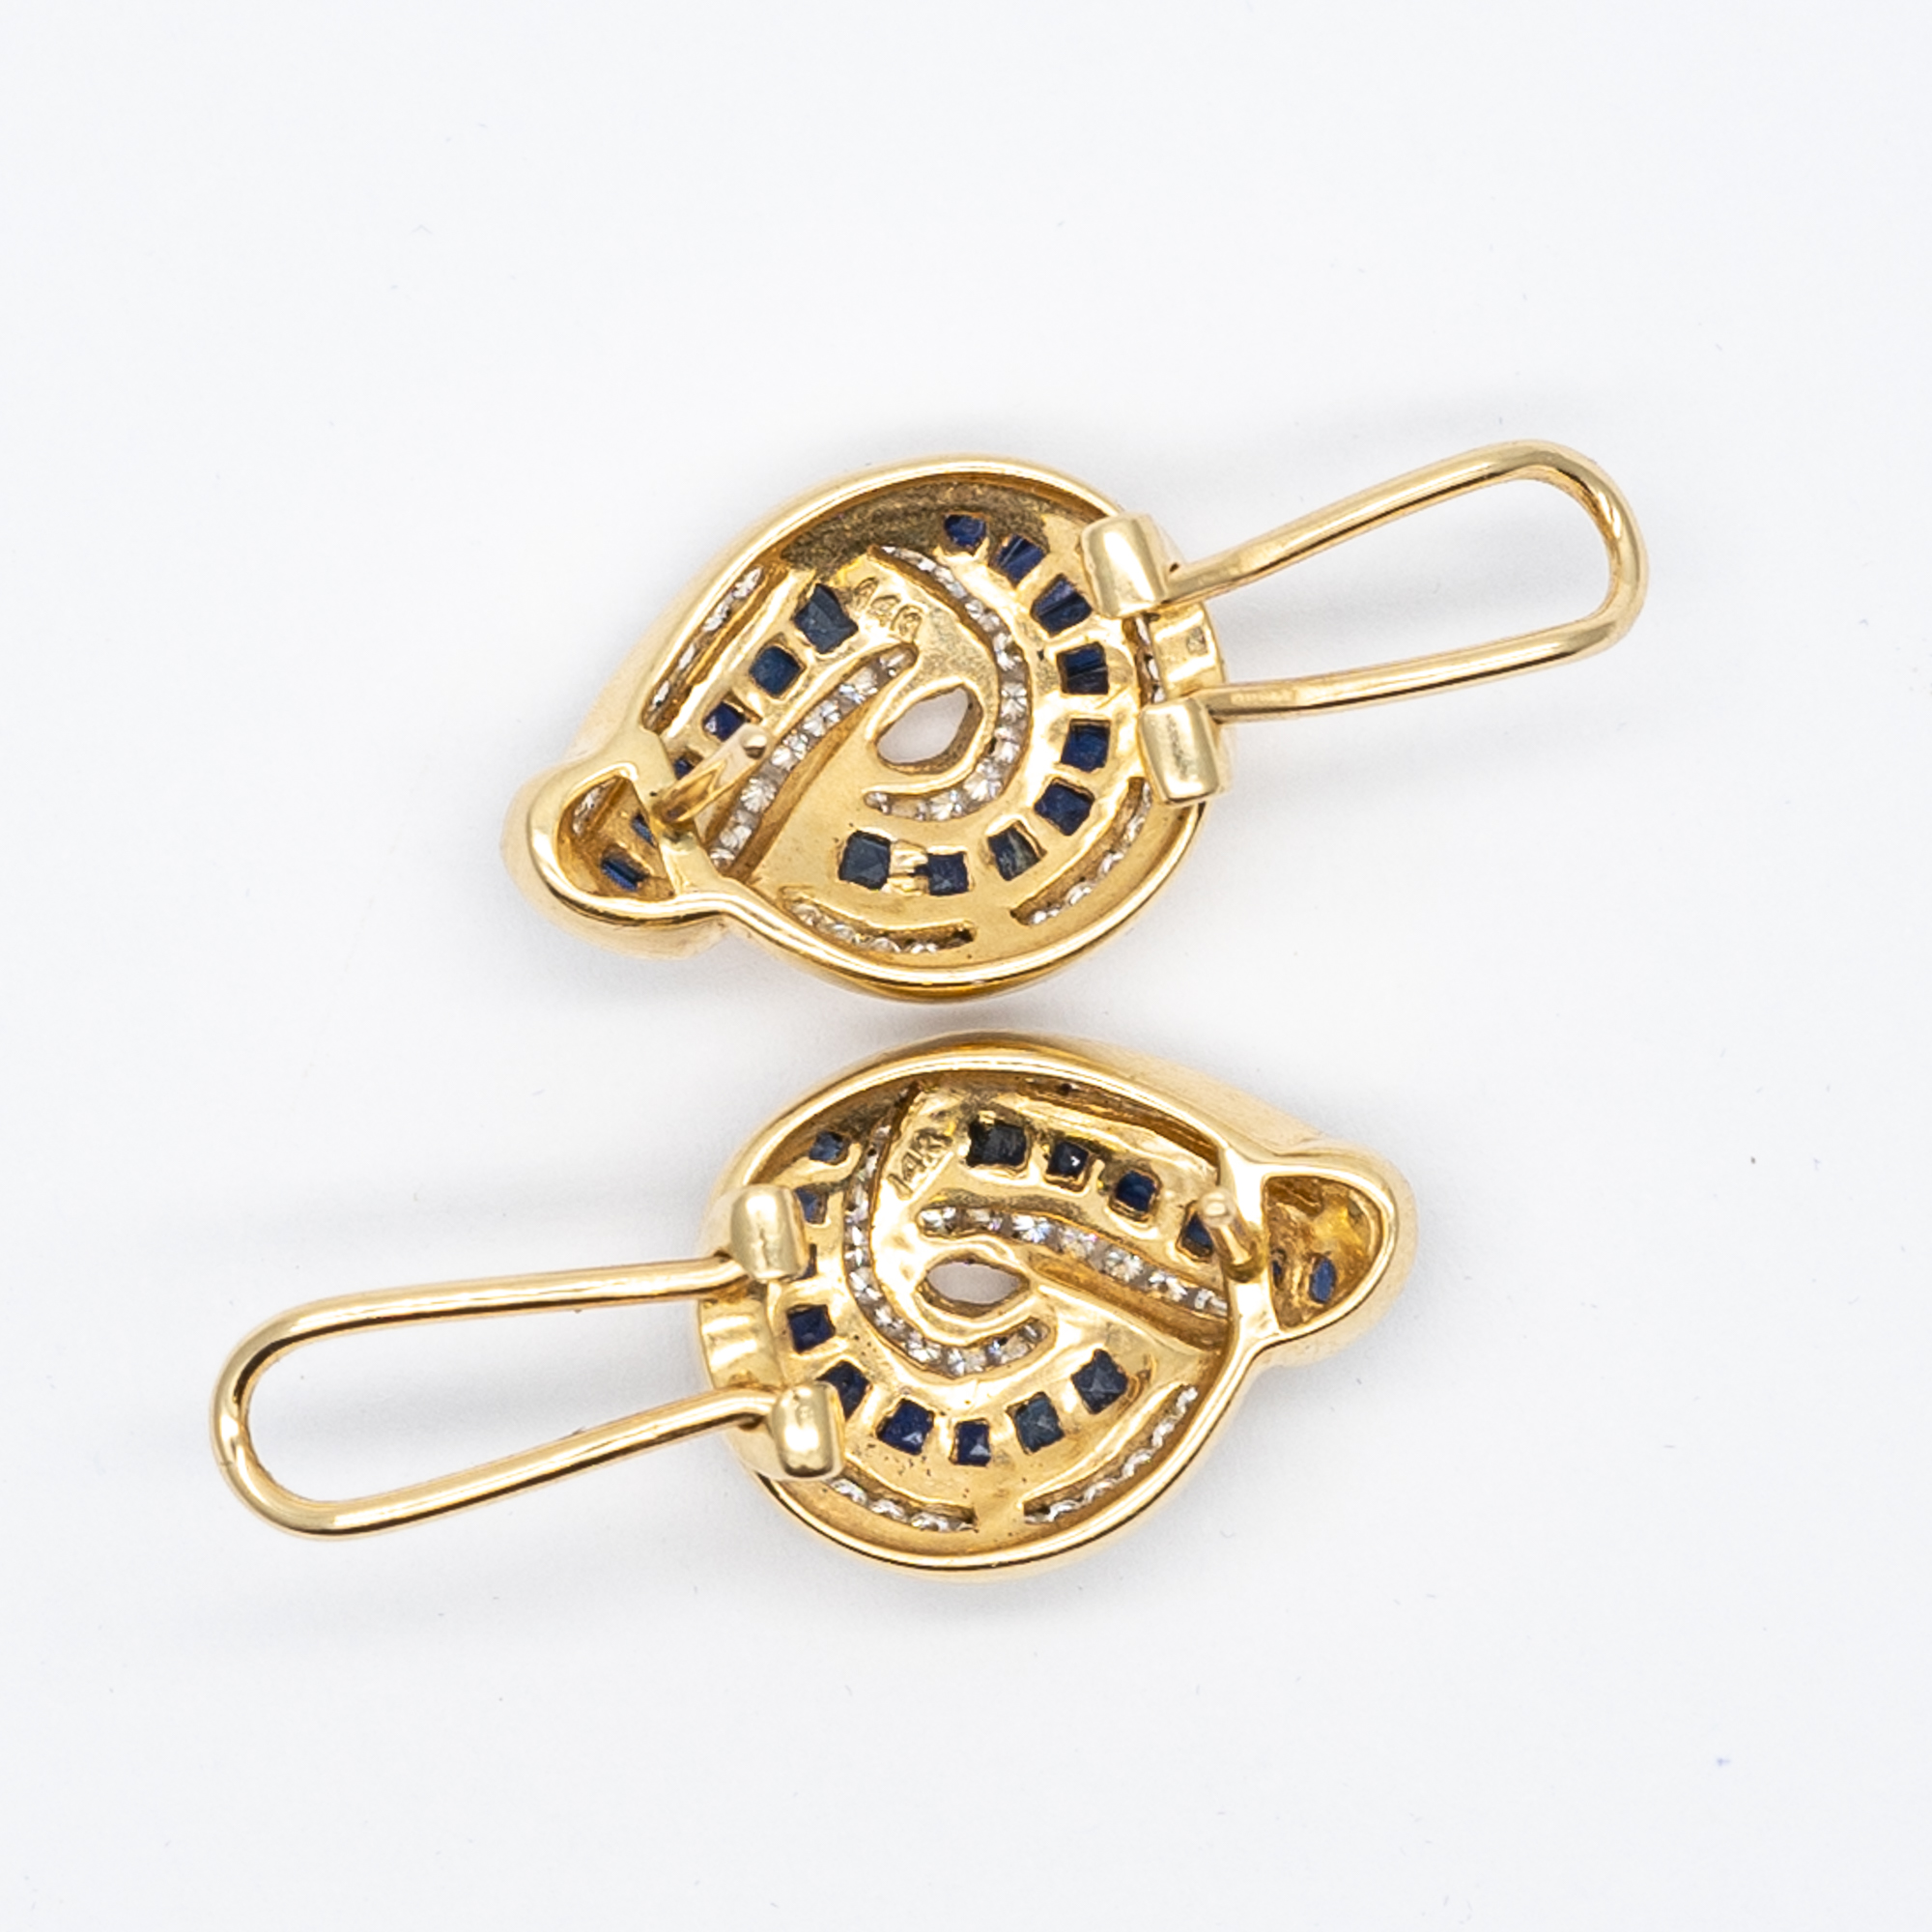 A pair of 14ct yellow gold diamond and sapphire earrings - Image 4 of 5